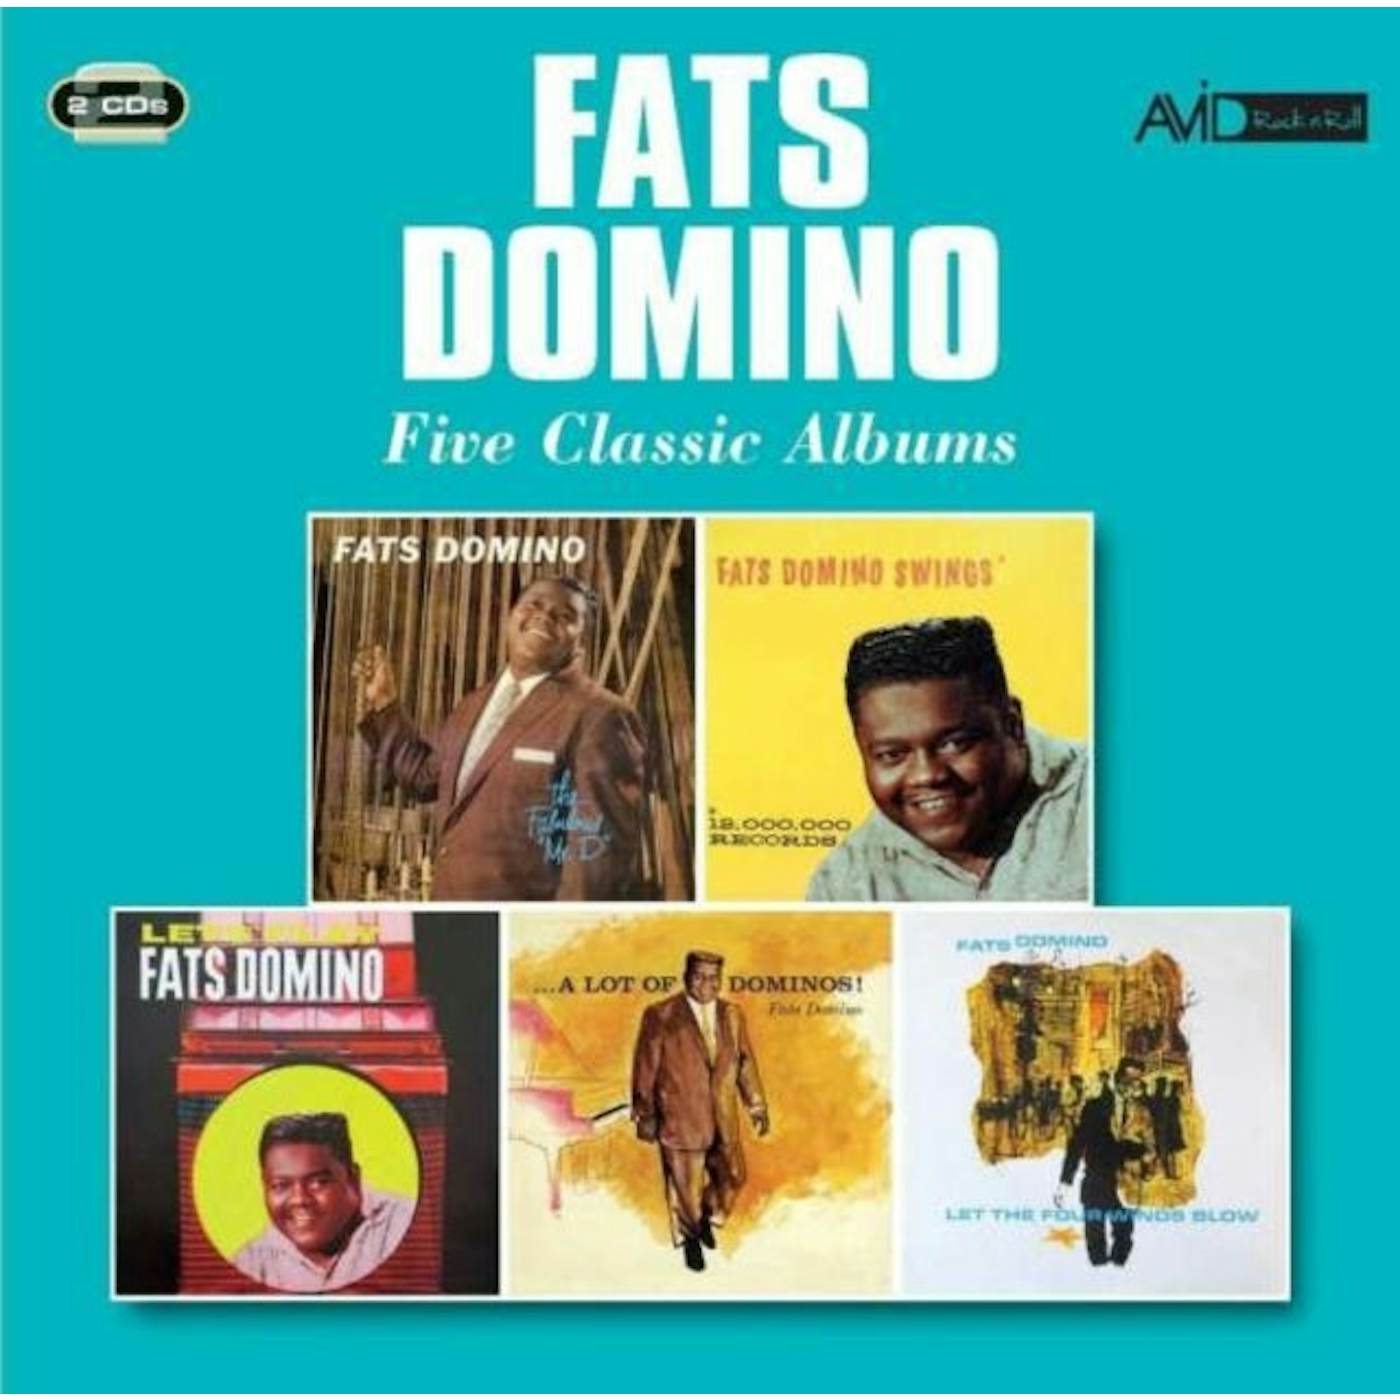 Fats Domino CD - Five Classic Albums (The Fabulous Mr. D / Swings / Let's Play Fats Domino / A Lot Of Dominos / Let The Four Winds Blow)